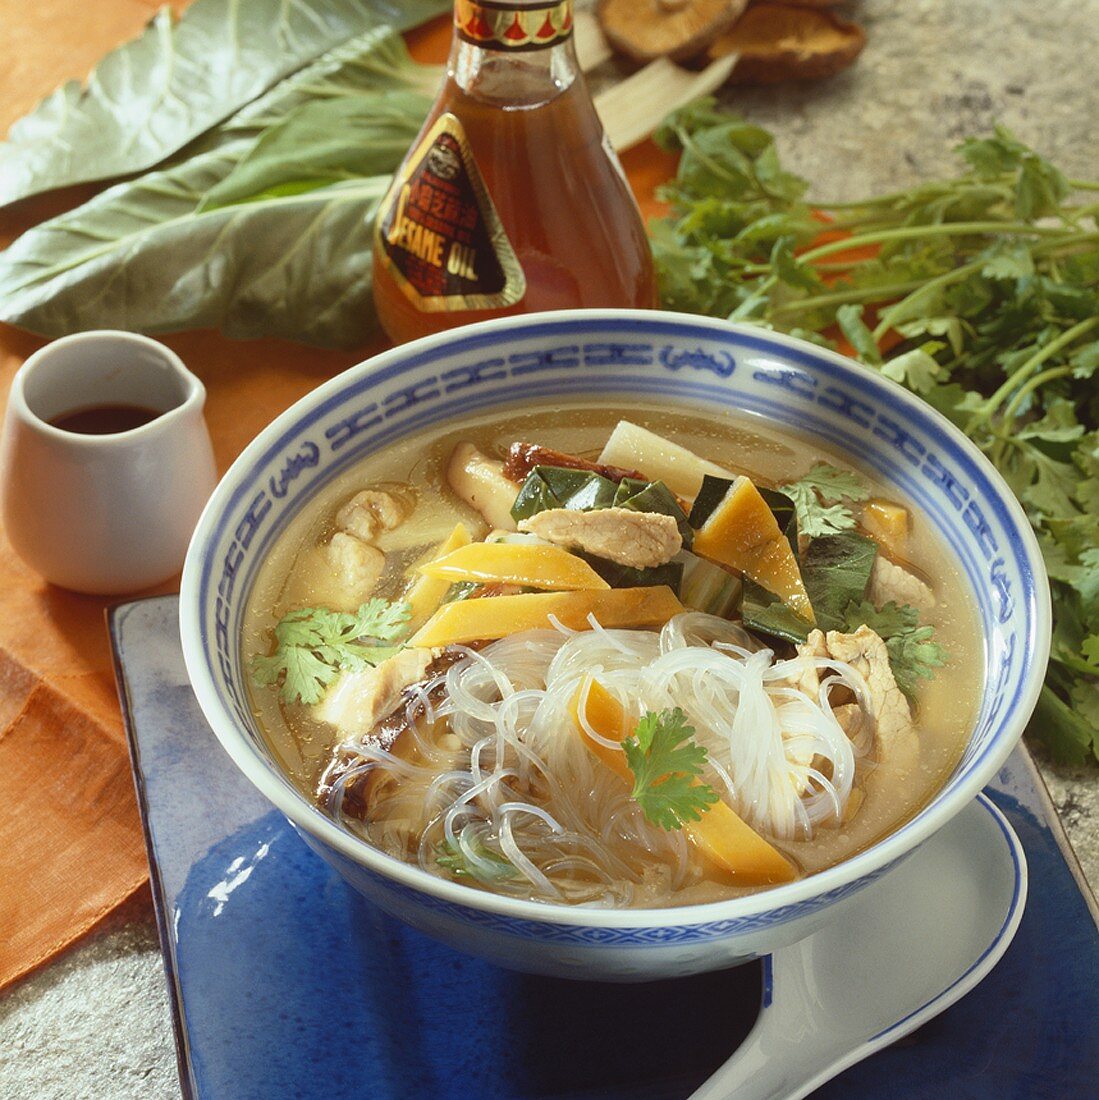 Hot and sour soup with glass noodles, vegetables and meat